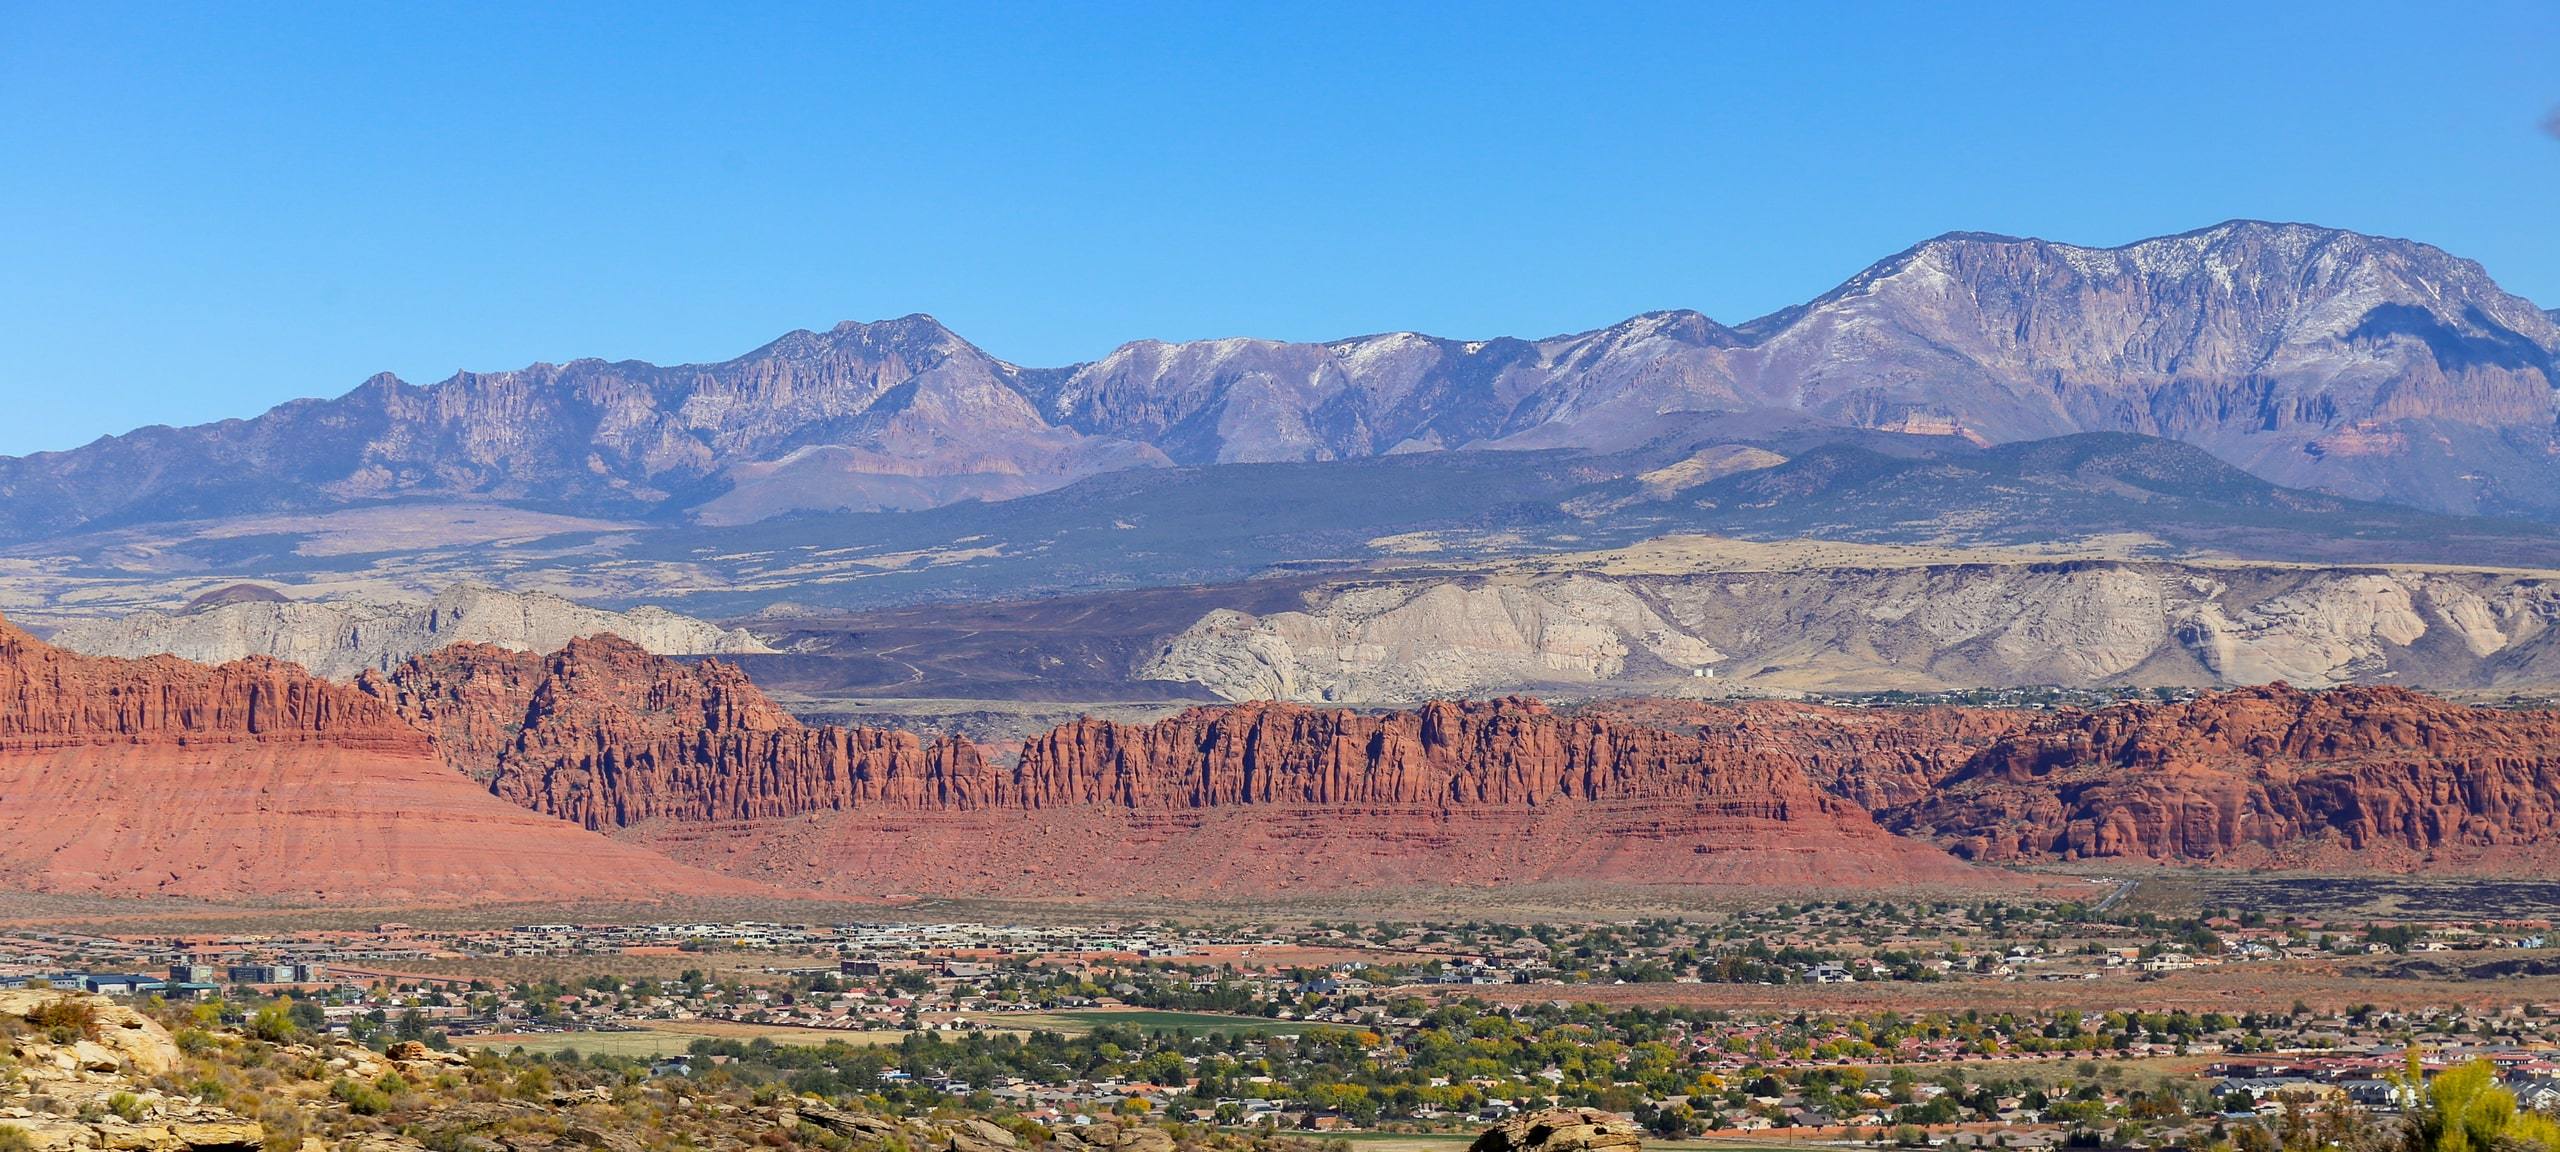 Soaring mountains and red rock formations in Southwestern Utah near St. George